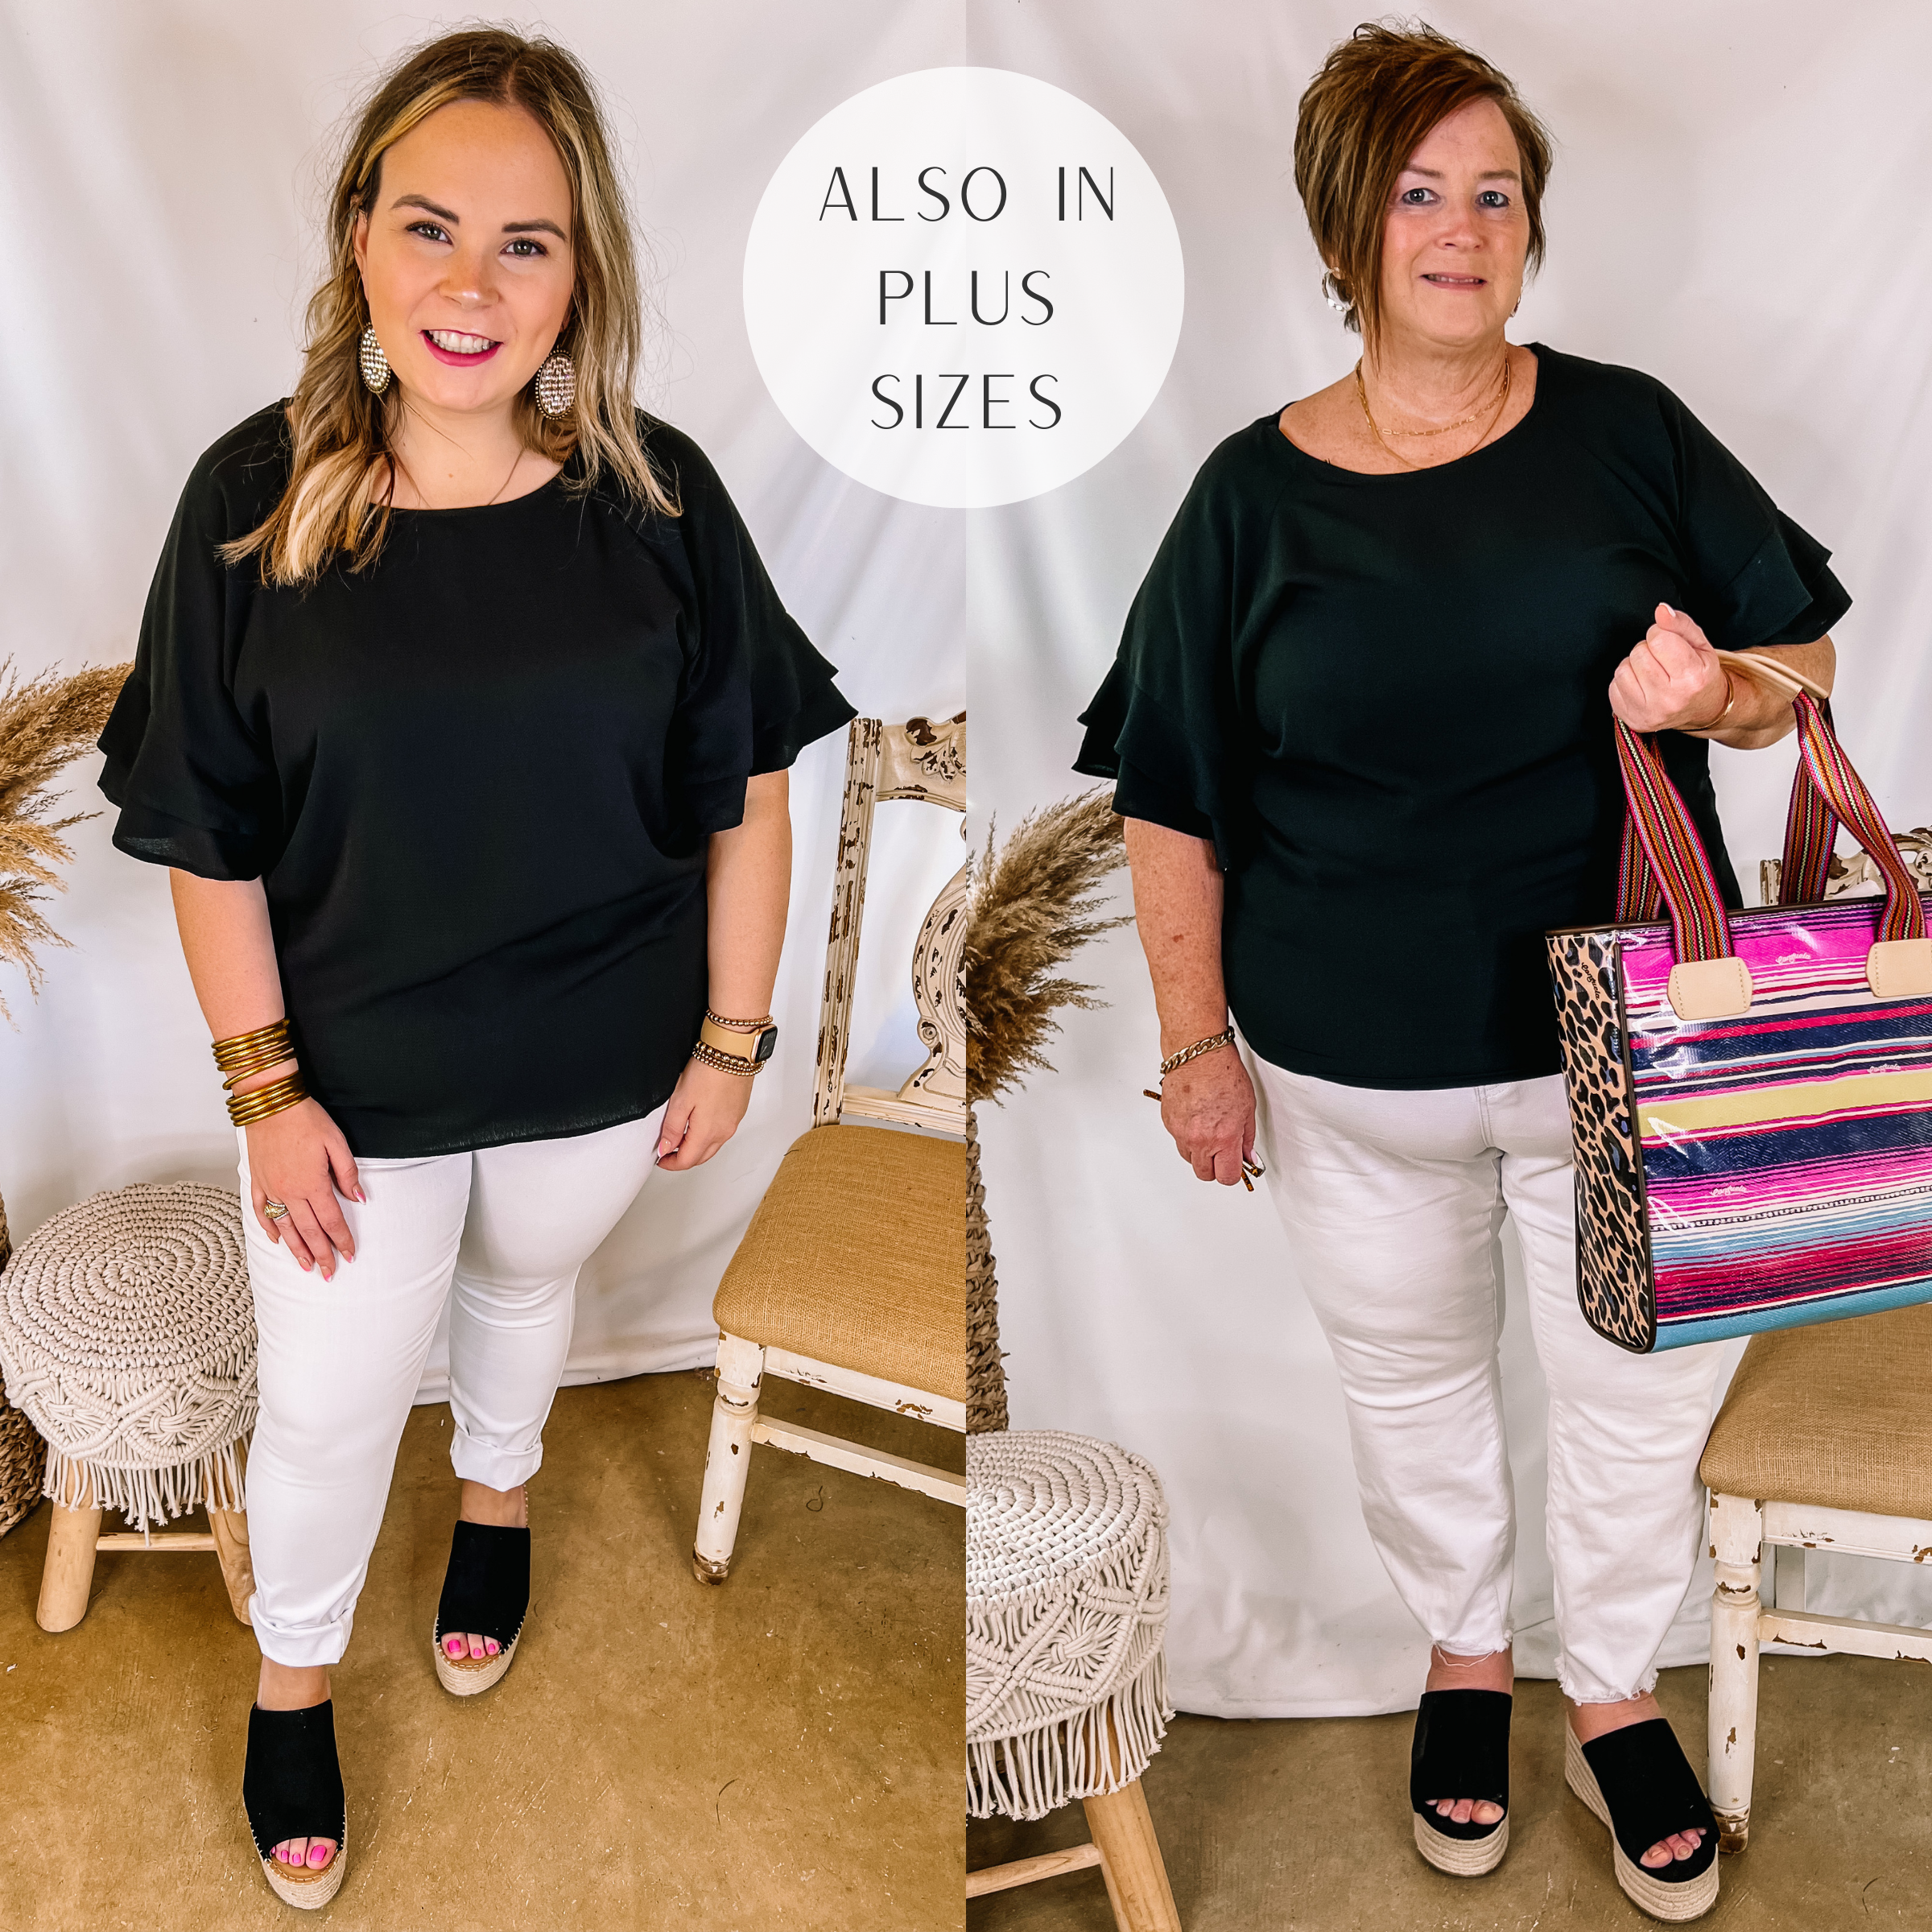 Models are wearing a plus size top that is black with ruffle sleeves. Both Models has it paired with white skinnies, black heels, and gold jewelry.